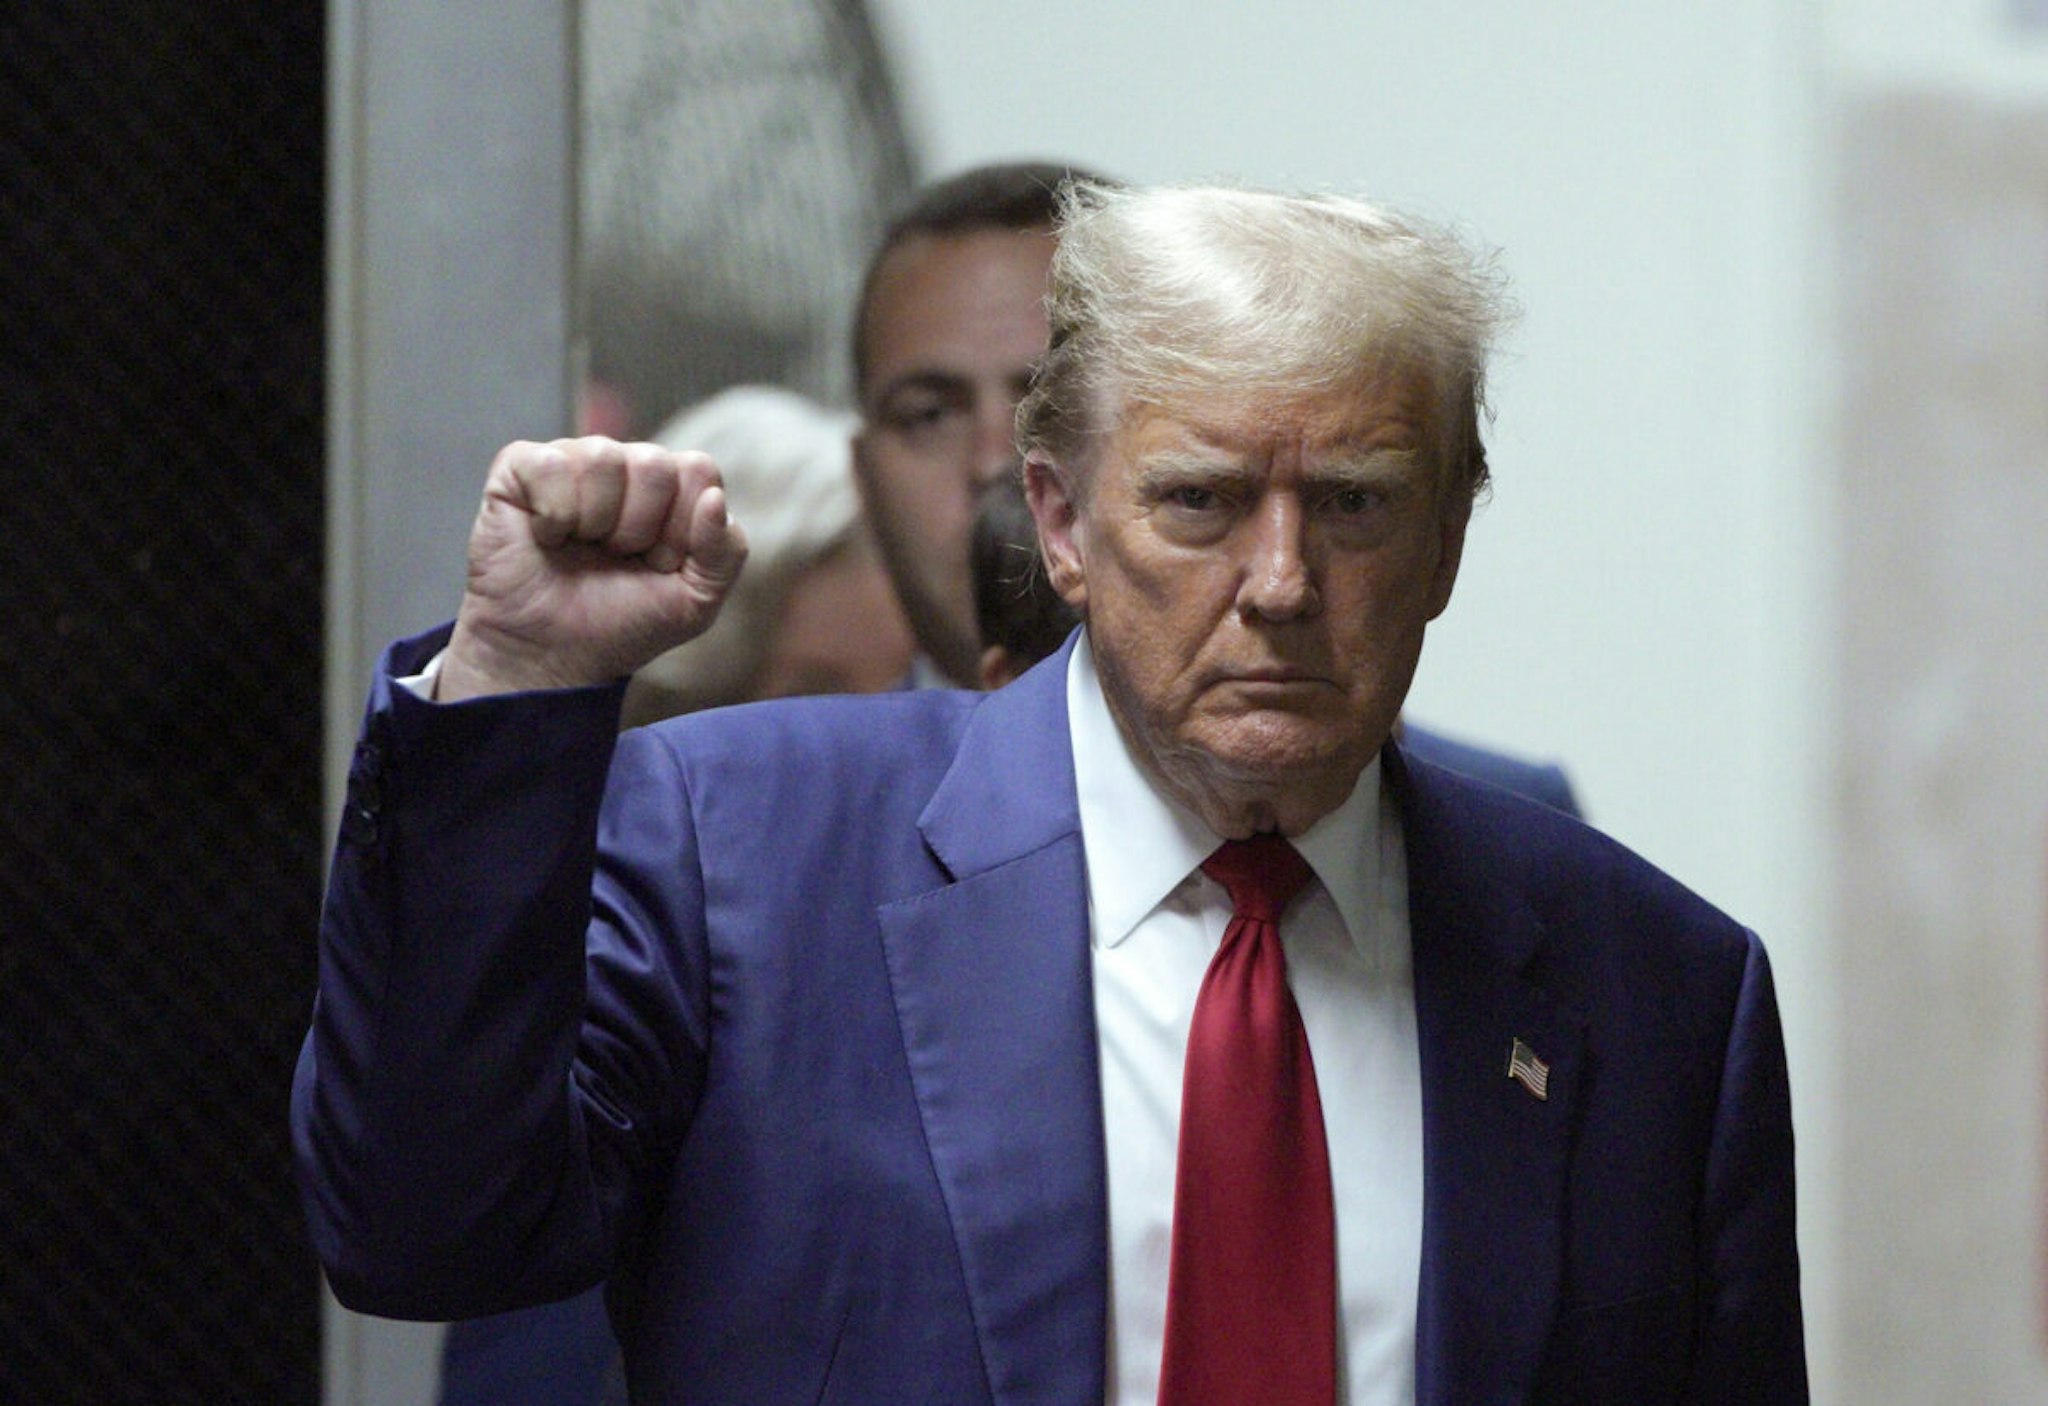 NEW YORK, NEW YORK - APRIL 30: Former U.S. President Donald Trump gestures as he returns to court during his trial for allegedly covering up hush money payments at Manhattan Criminal Court on April 30, 2024 in New York City. Former U.S. President Donald Trump faces 34 felony counts of falsifying business records in the first of his criminal cases to go to trial.